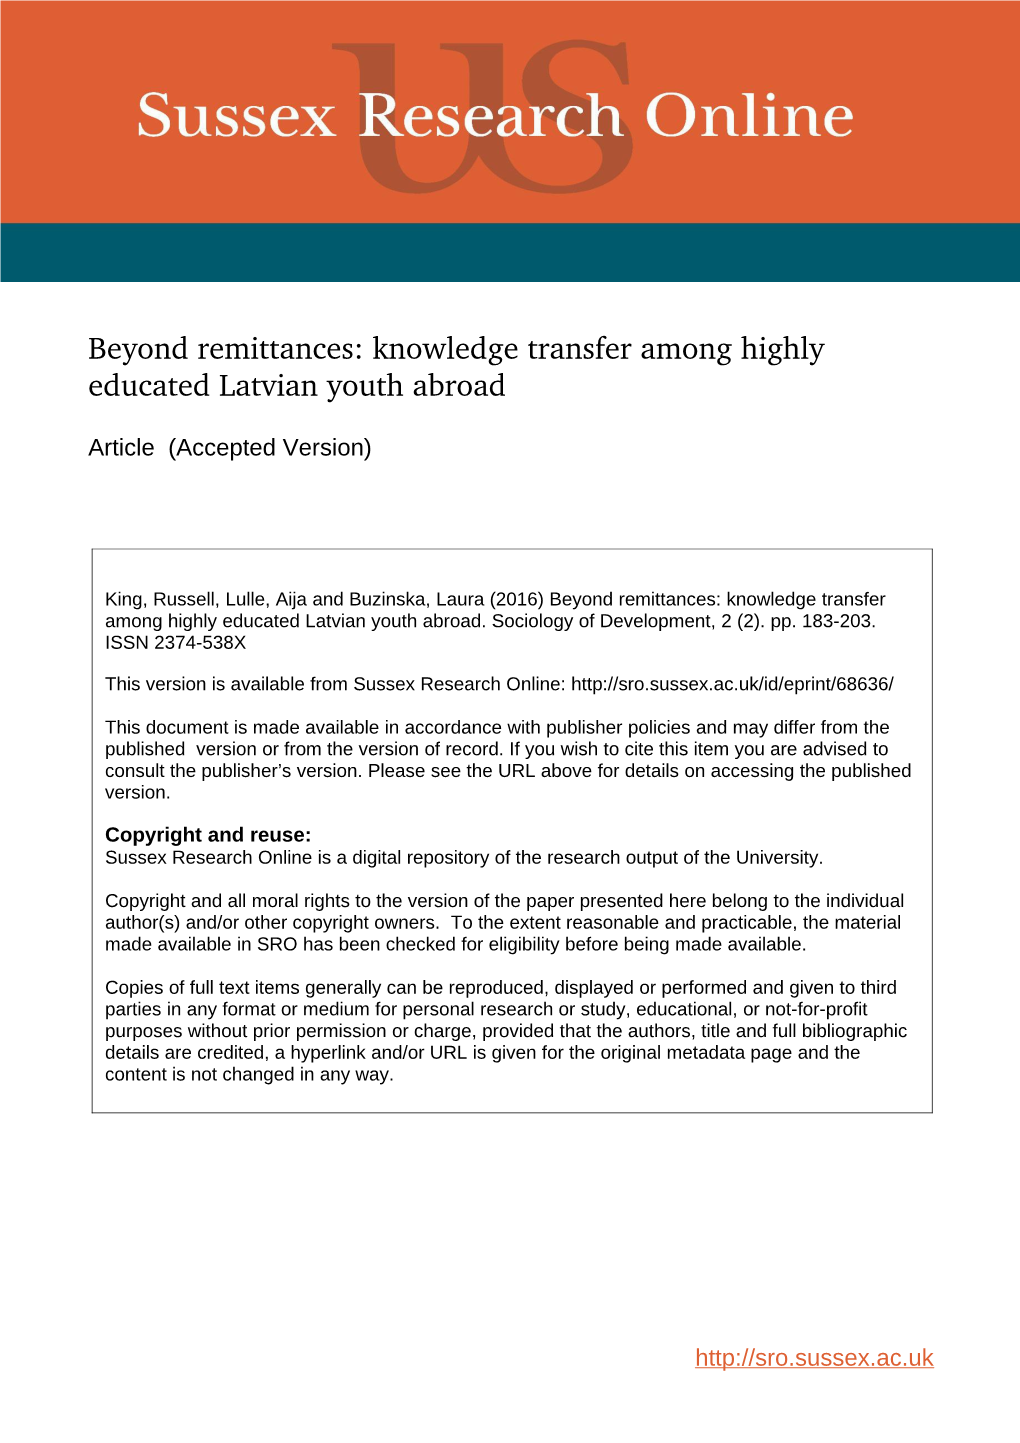 Beyond Remittances: Knowledge Transfer Among Highly Educated Latvian Youth Abroad